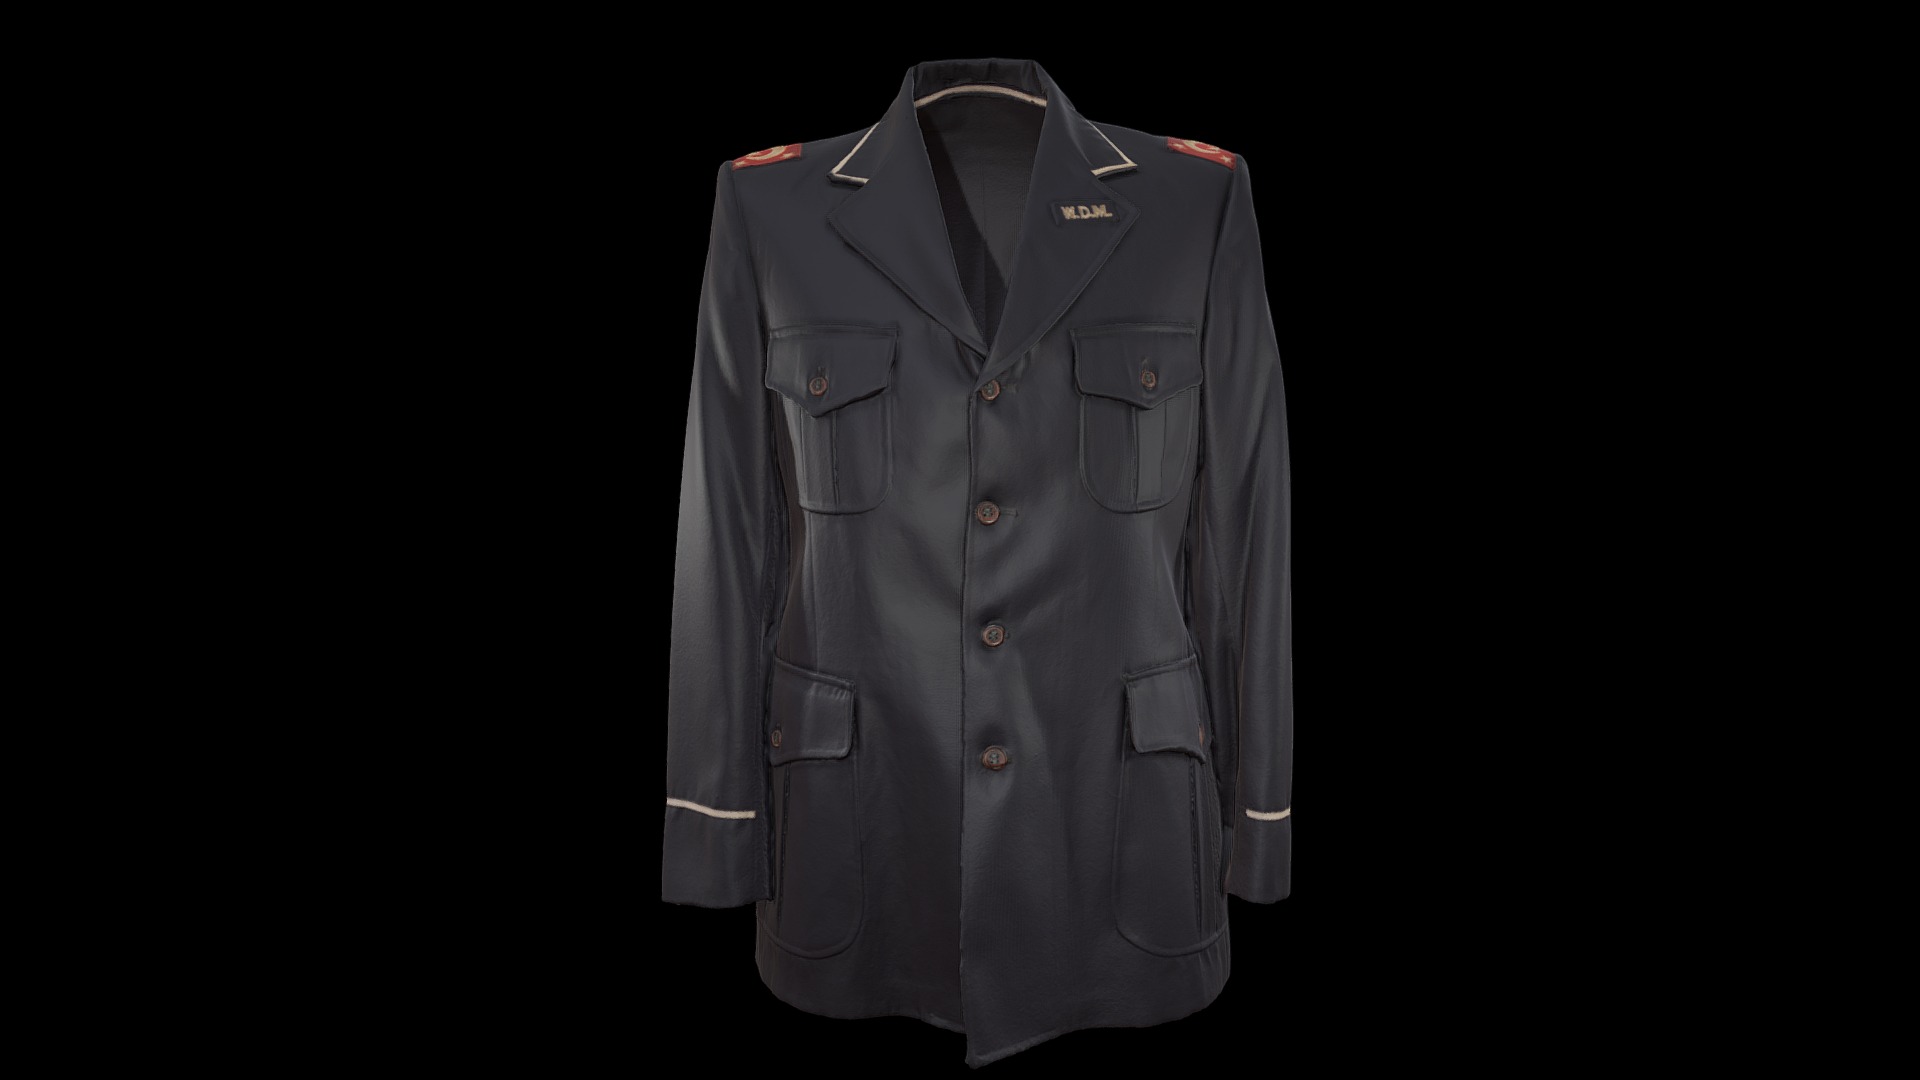 Fruit of Islam uniform jacket.

This object was 3D scanned using a Creaform Go Scan 50 3d model